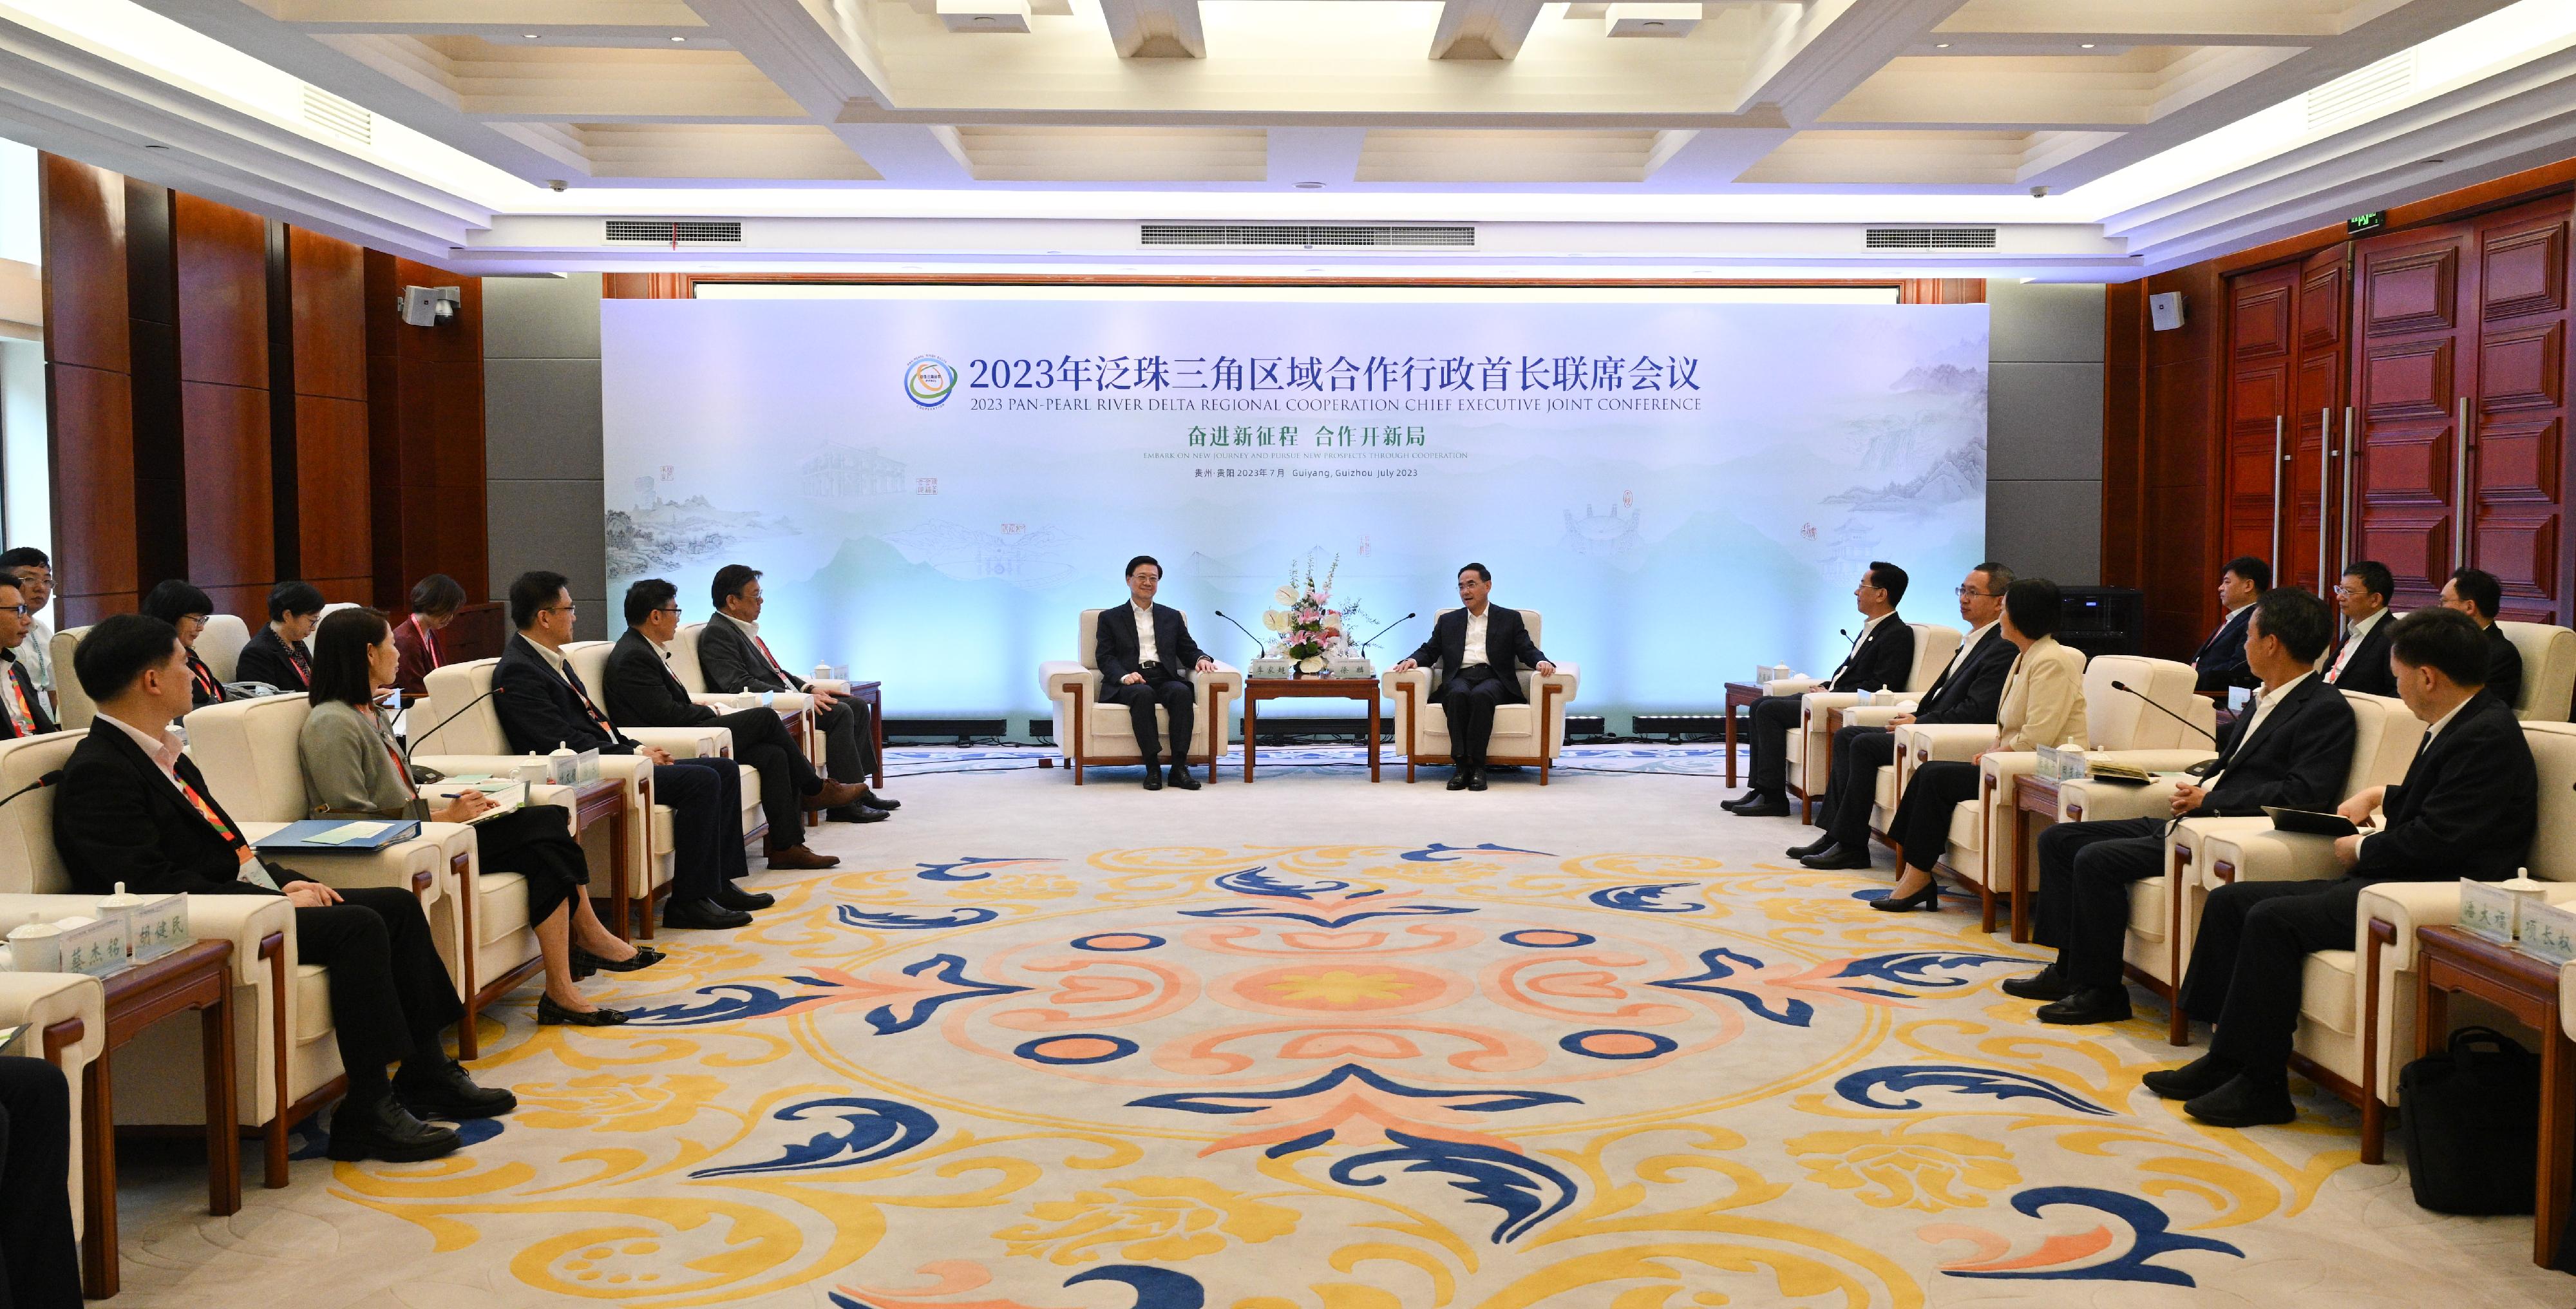 The Chief Executive, Mr John Lee, led a delegation to start his visit programme in Guiyang today (July 6). Photo shows Mr Lee (sixth left) meeting with the Secretary of the CPC Guizhou Provincial Committee and Director of the Standing Committee of the Guizhou Provincial People's Congress, Mr Xu Lin (sixth right), in Guiyang.